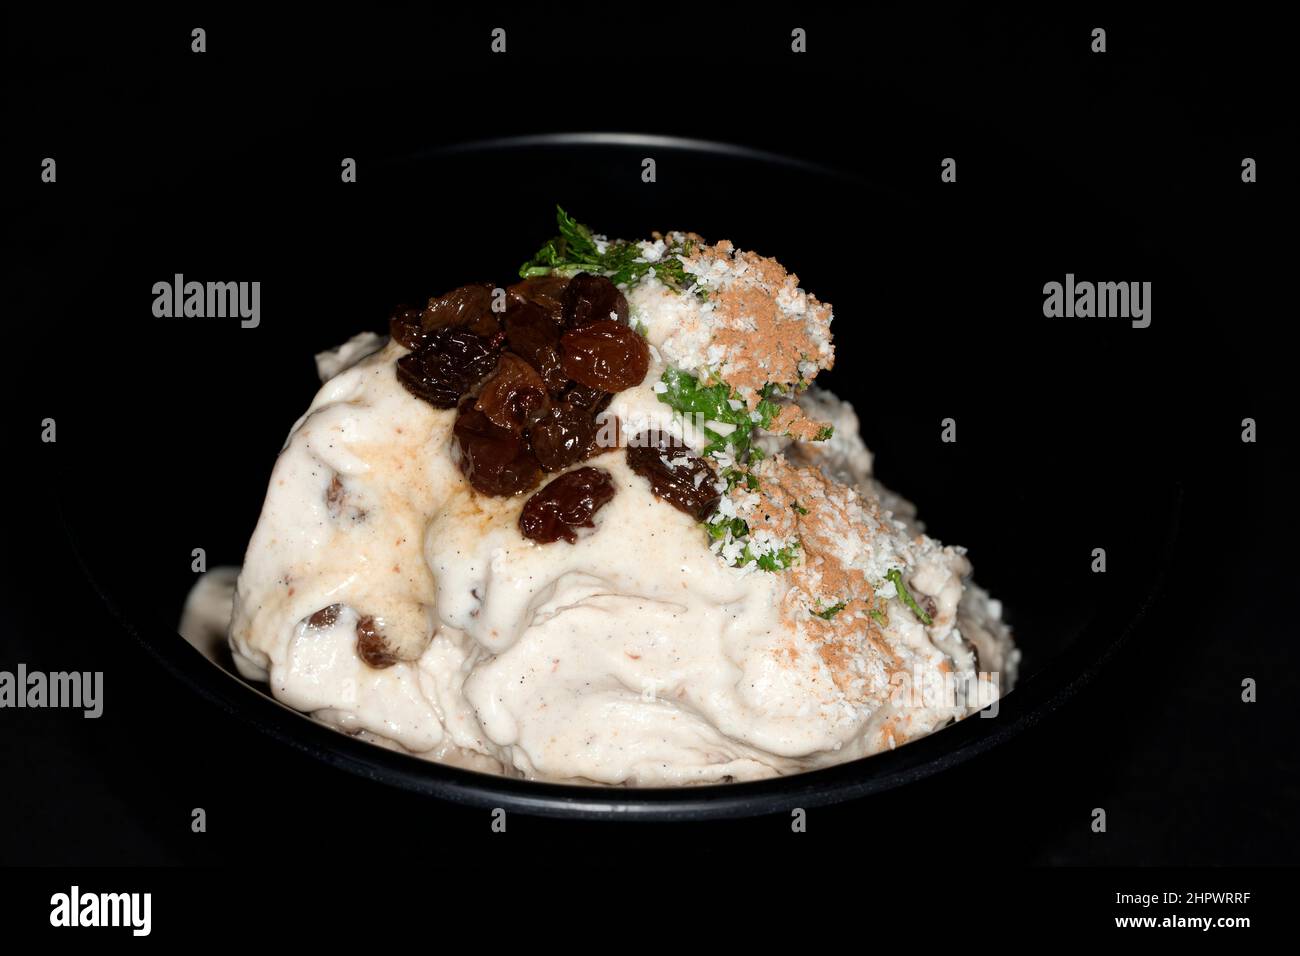 Rum, sultanas, coconut ice cream with cinnamon and fresh mint, studio photography with black background Stock Photo